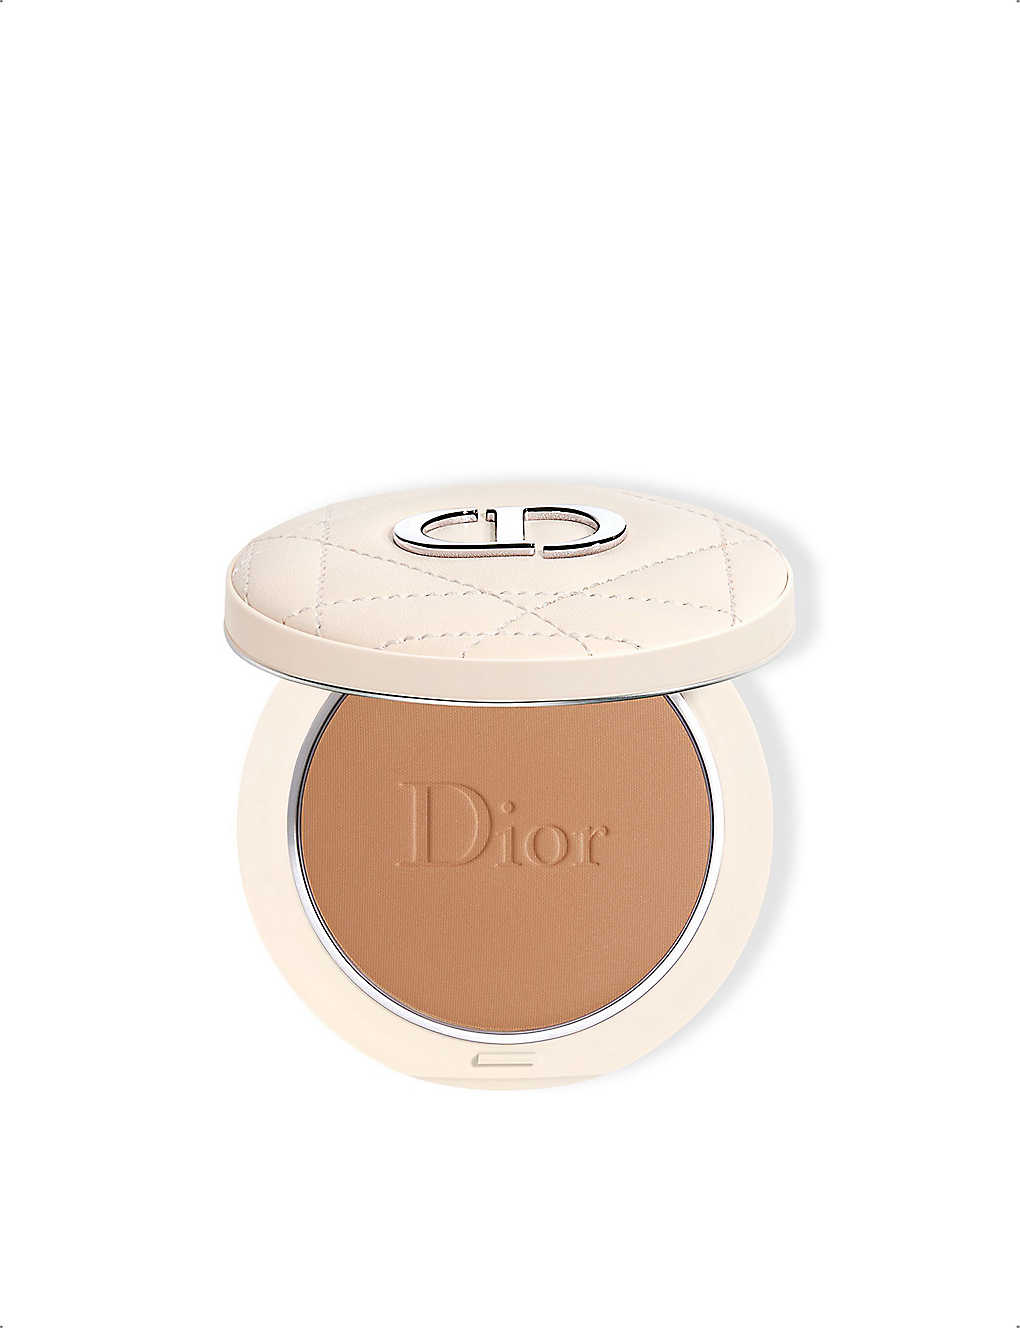 Dior Forever Natural Bronze Powder 9g In 005